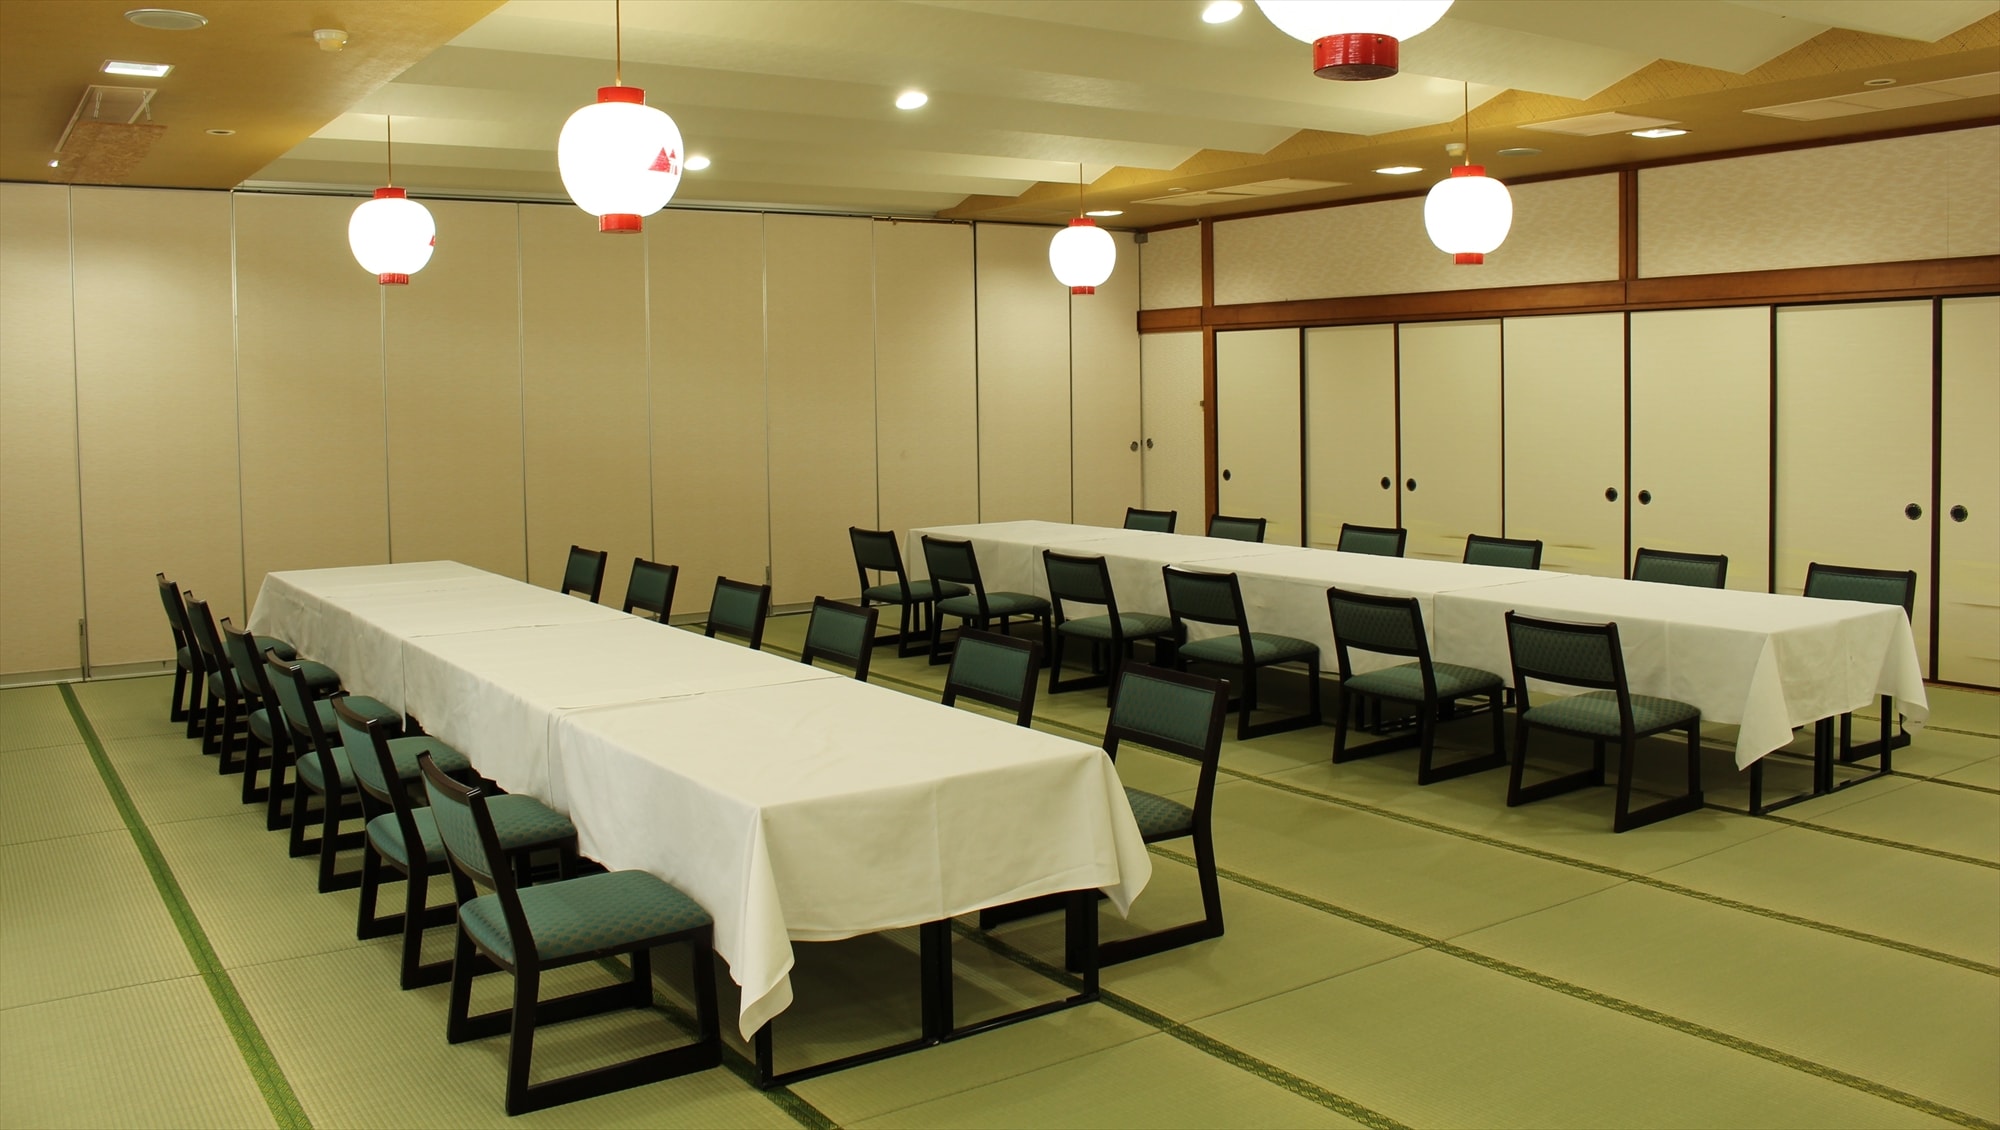 There is a 200 tatami banquet hall (4 divisions possible), so groups of up to 120 people can use it. Chair table type